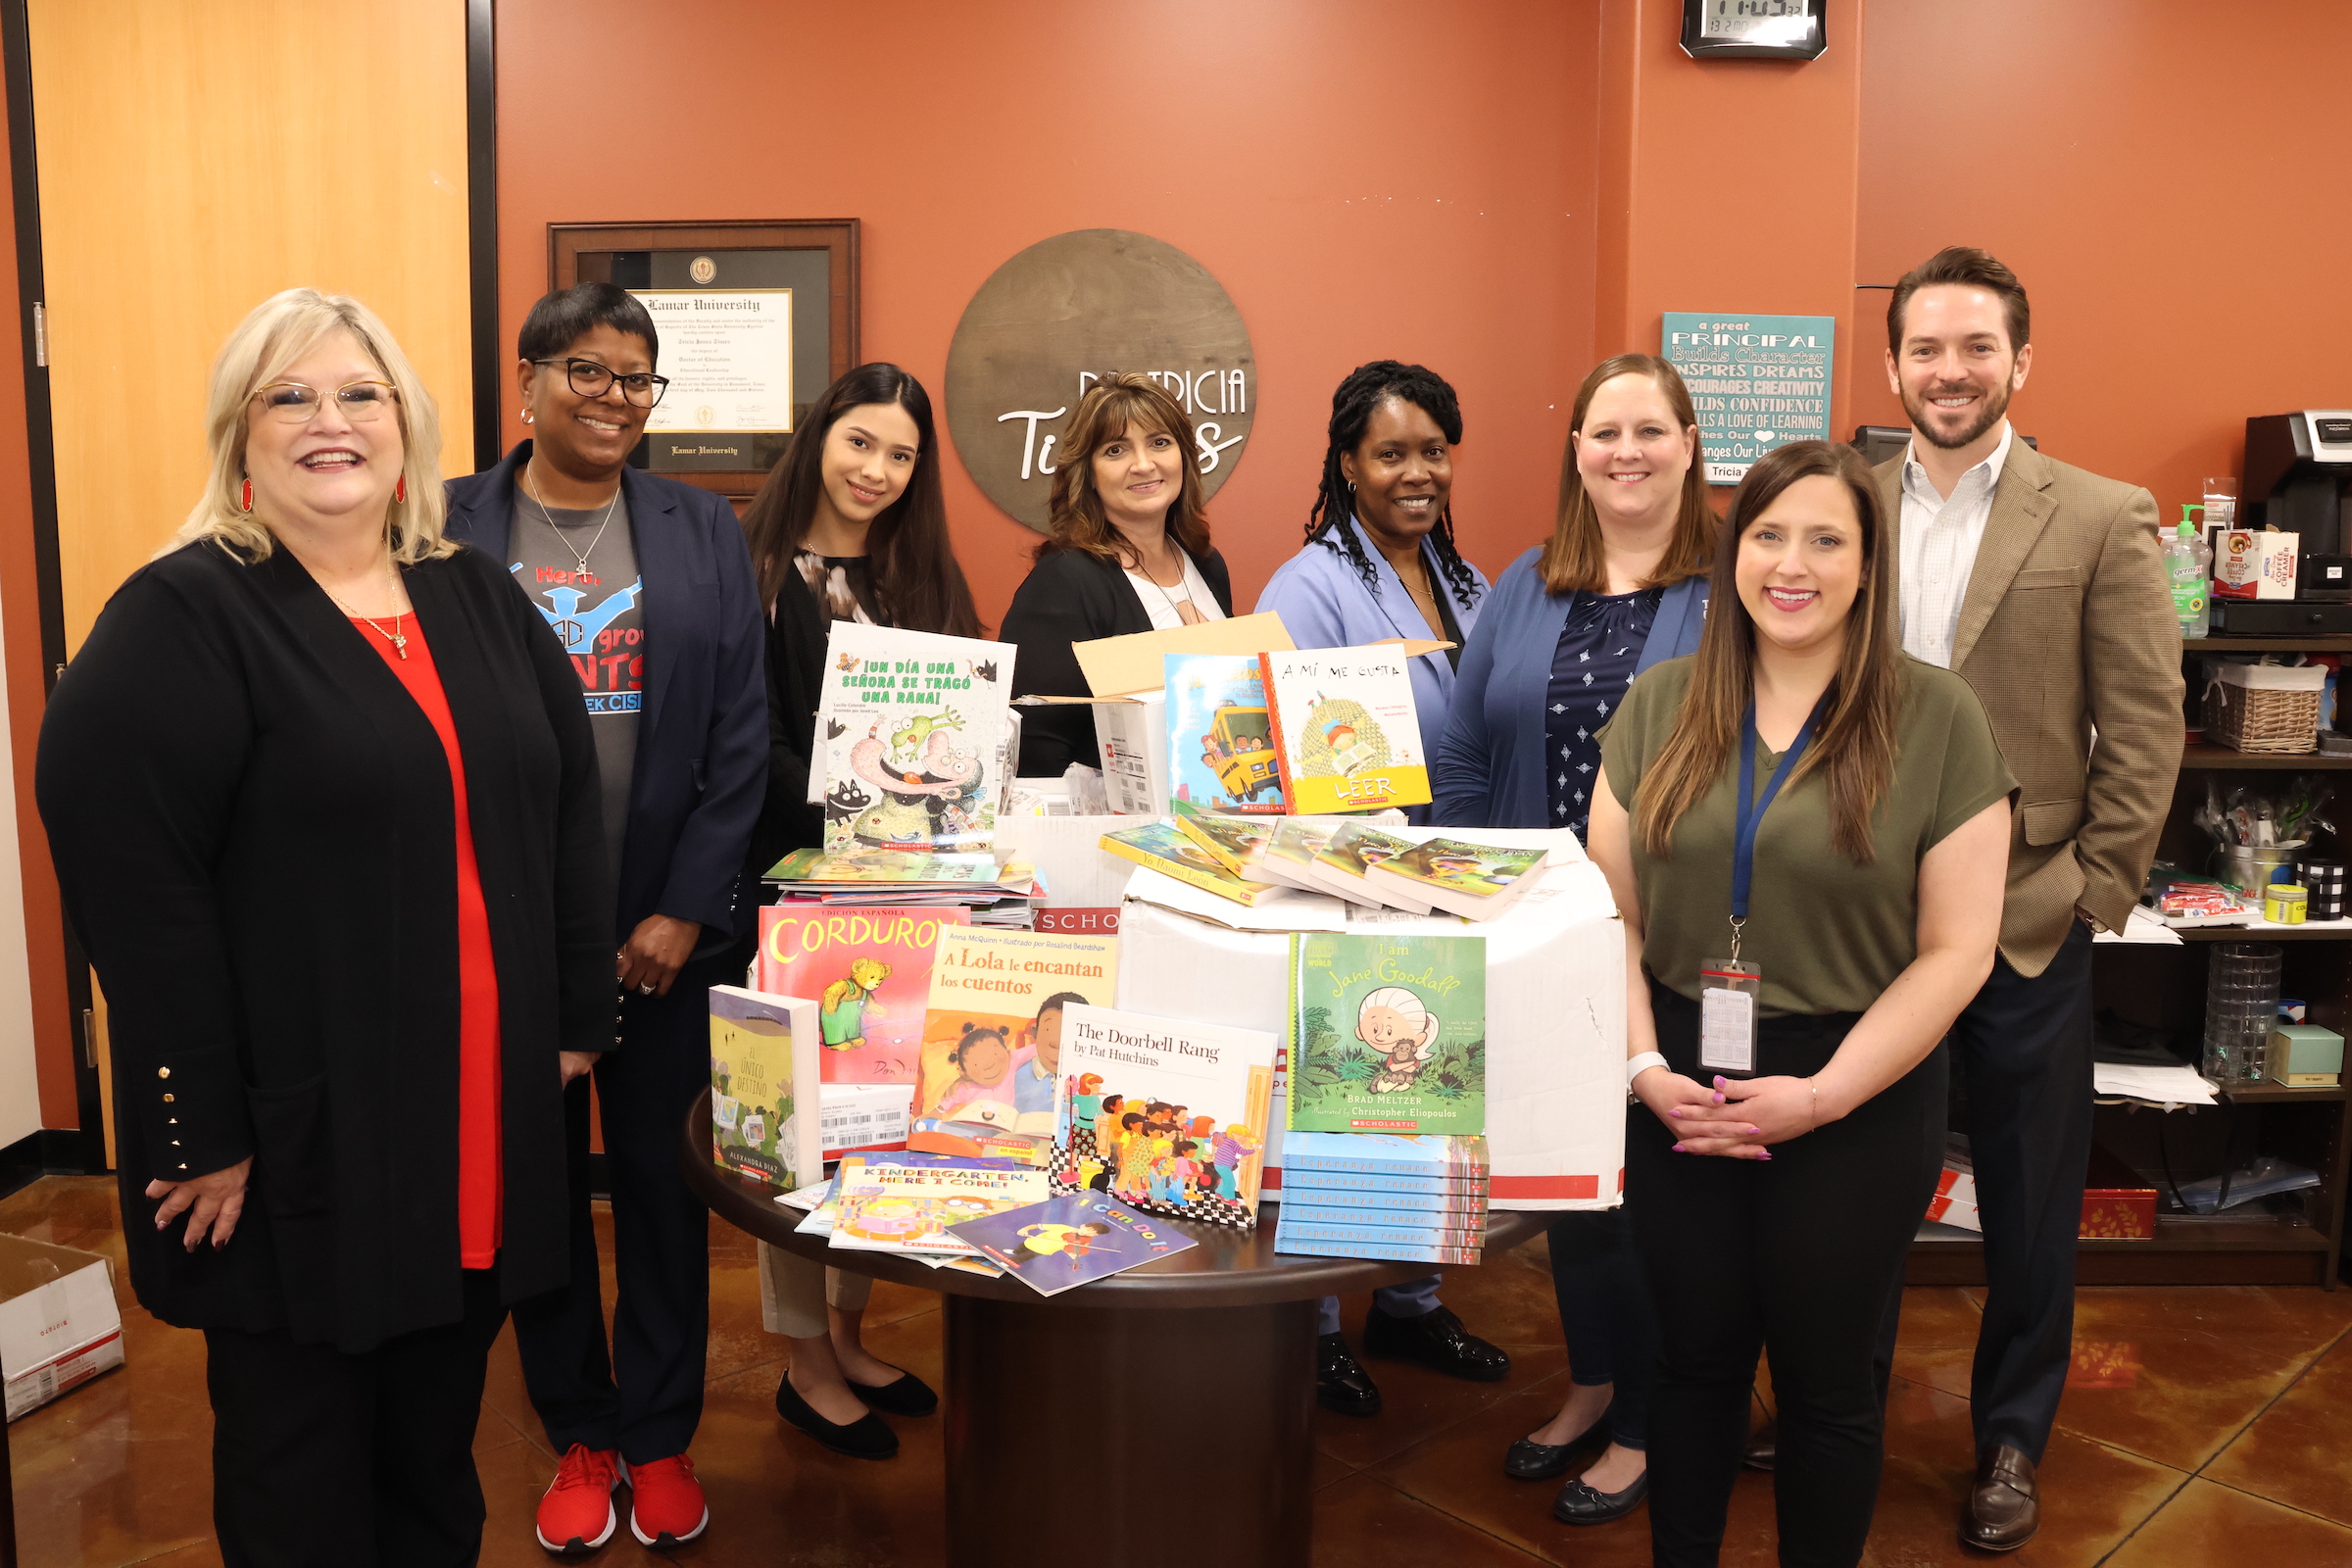 Carlson law firm poses with district administrators and donated books